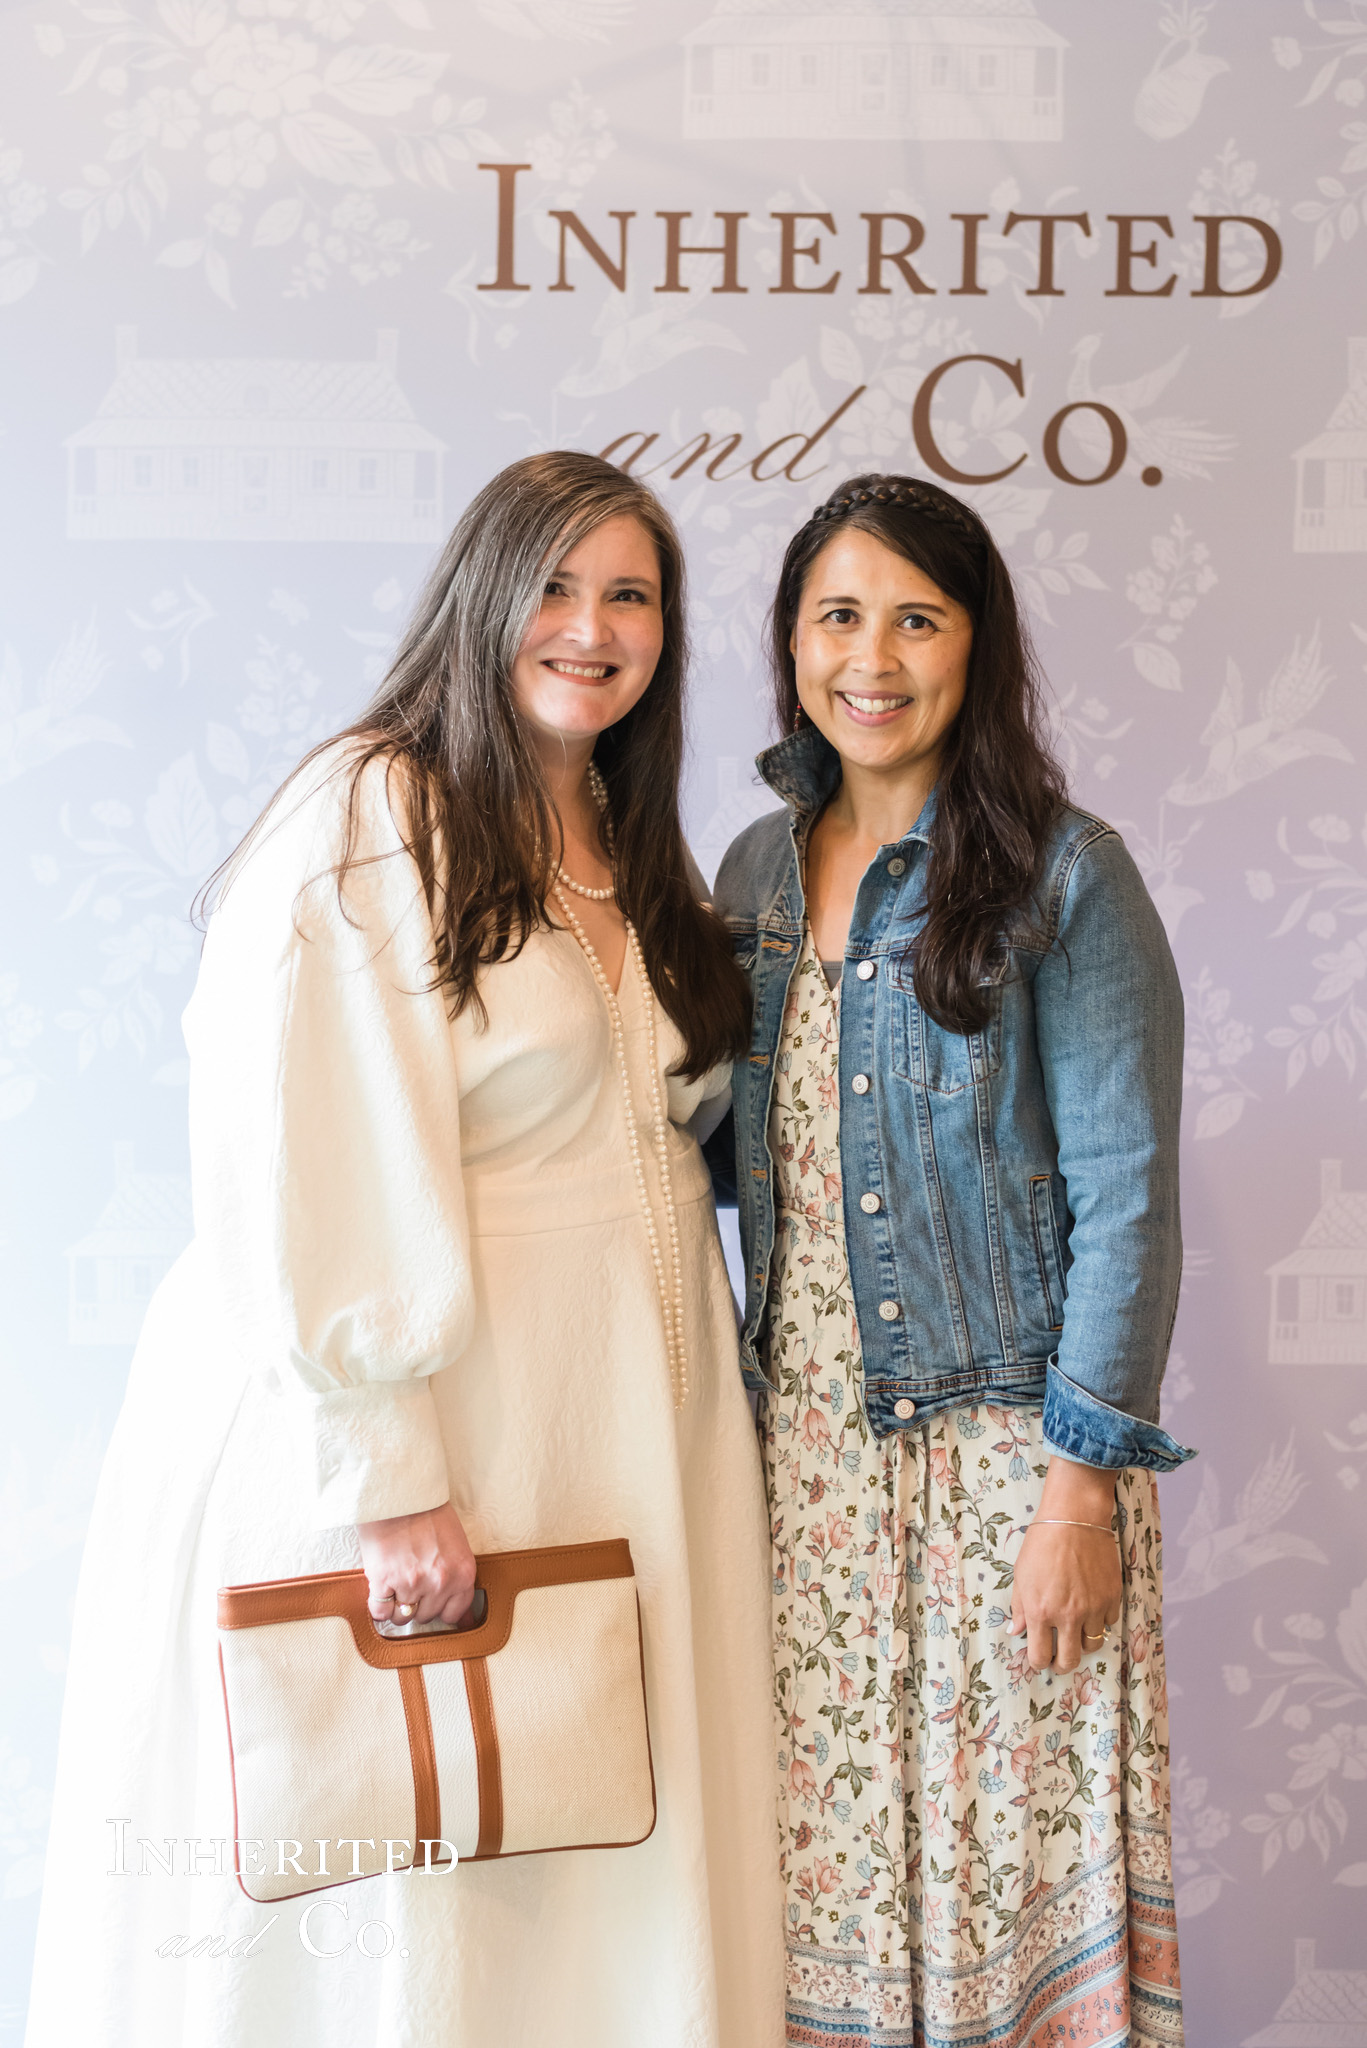 Lauren of Inherited and Co. and Genevieve of Gracefully Home